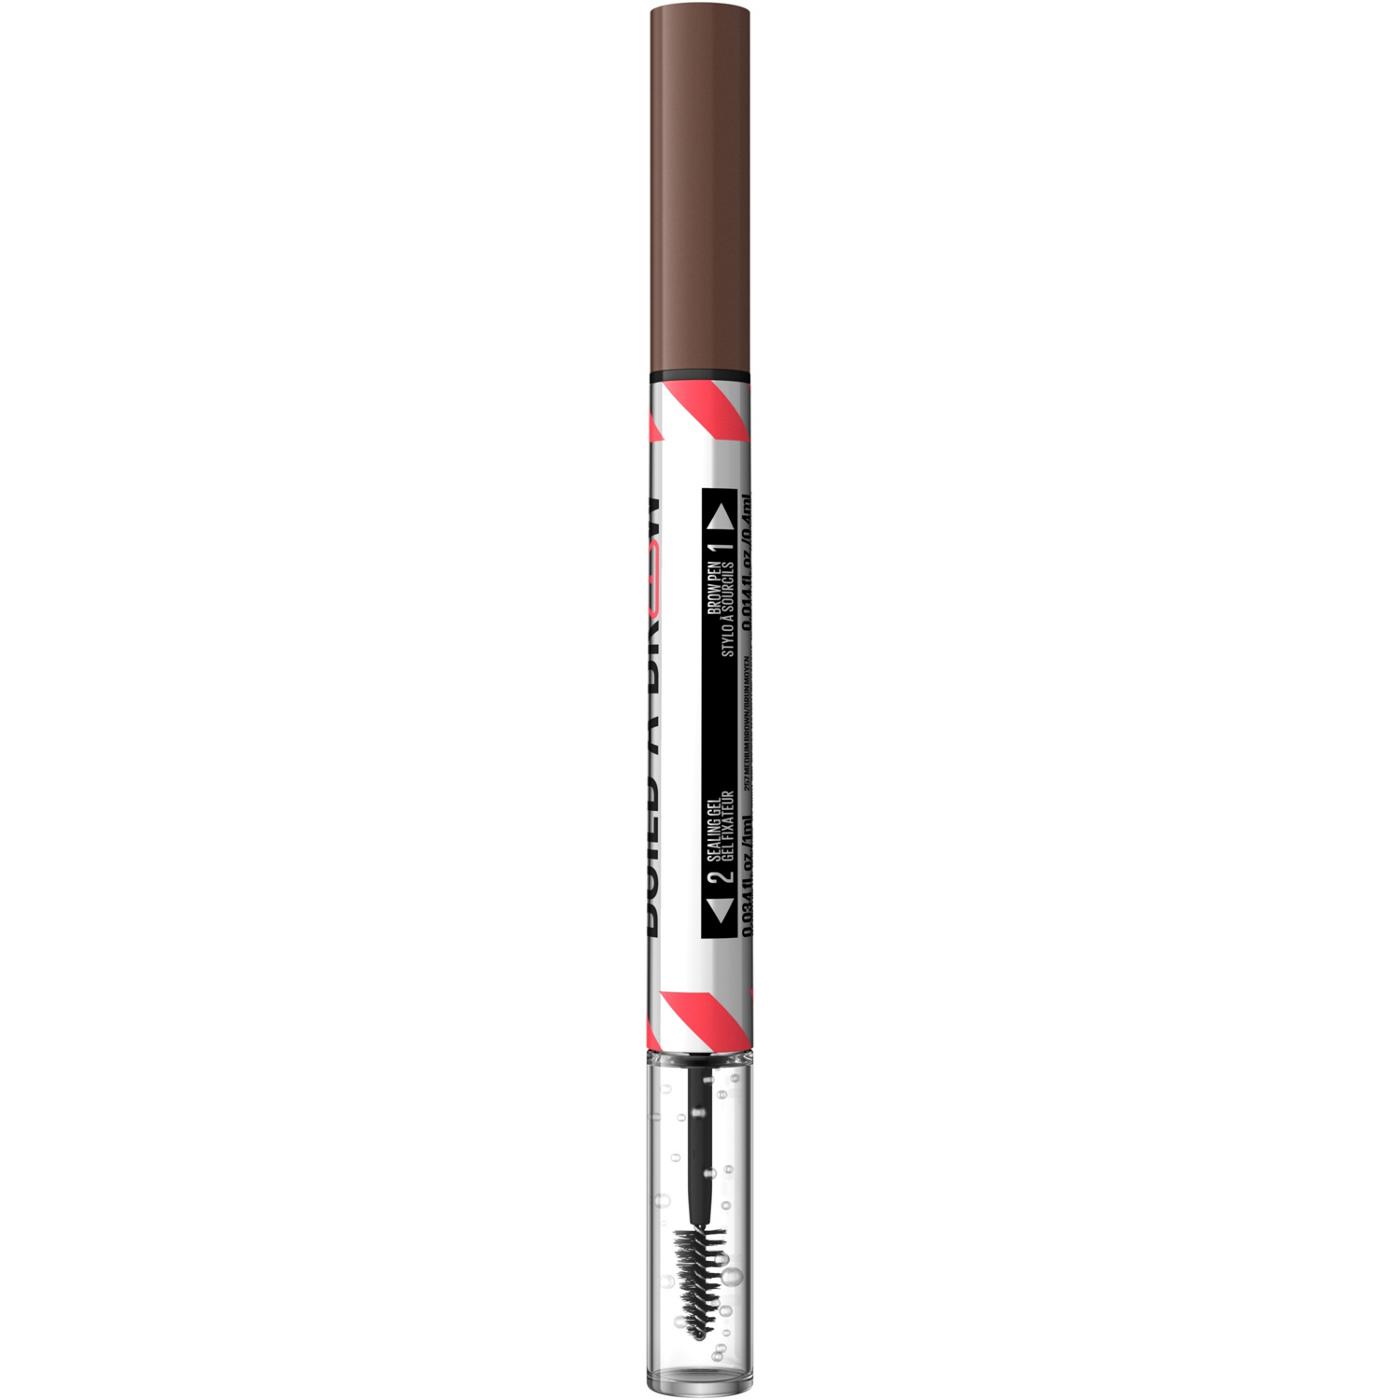 Maybelline Build A Brow 2 In 1 Brow Pen - Medium Brown; image 8 of 16